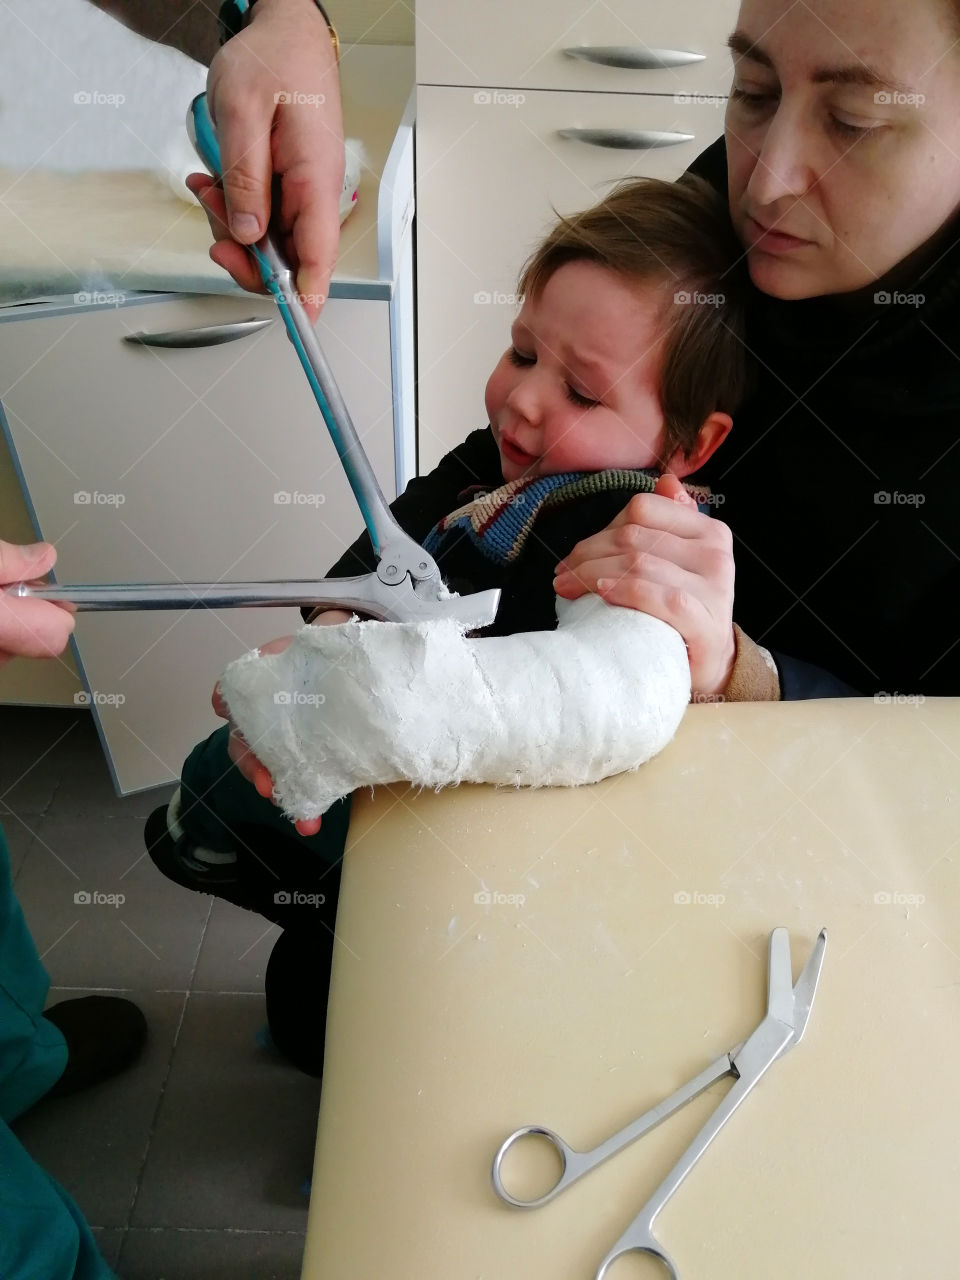 Boy is removed from the plaster, he is afraid and cries